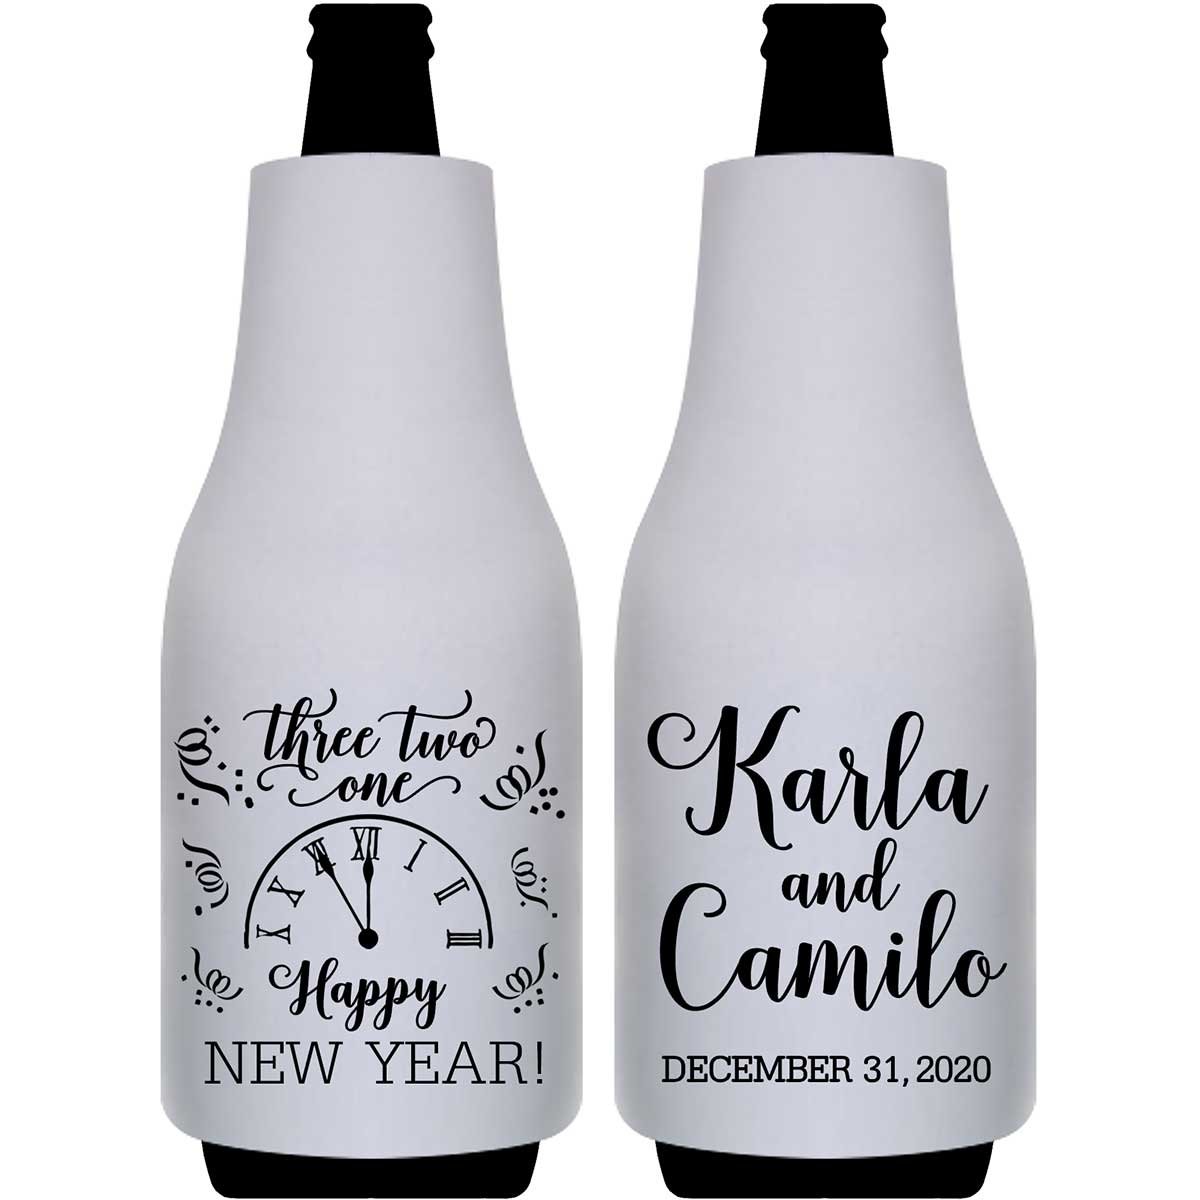 Happy New Year 2A Foldable Bottle Sleeve Koozies Wedding Gifts for Guests